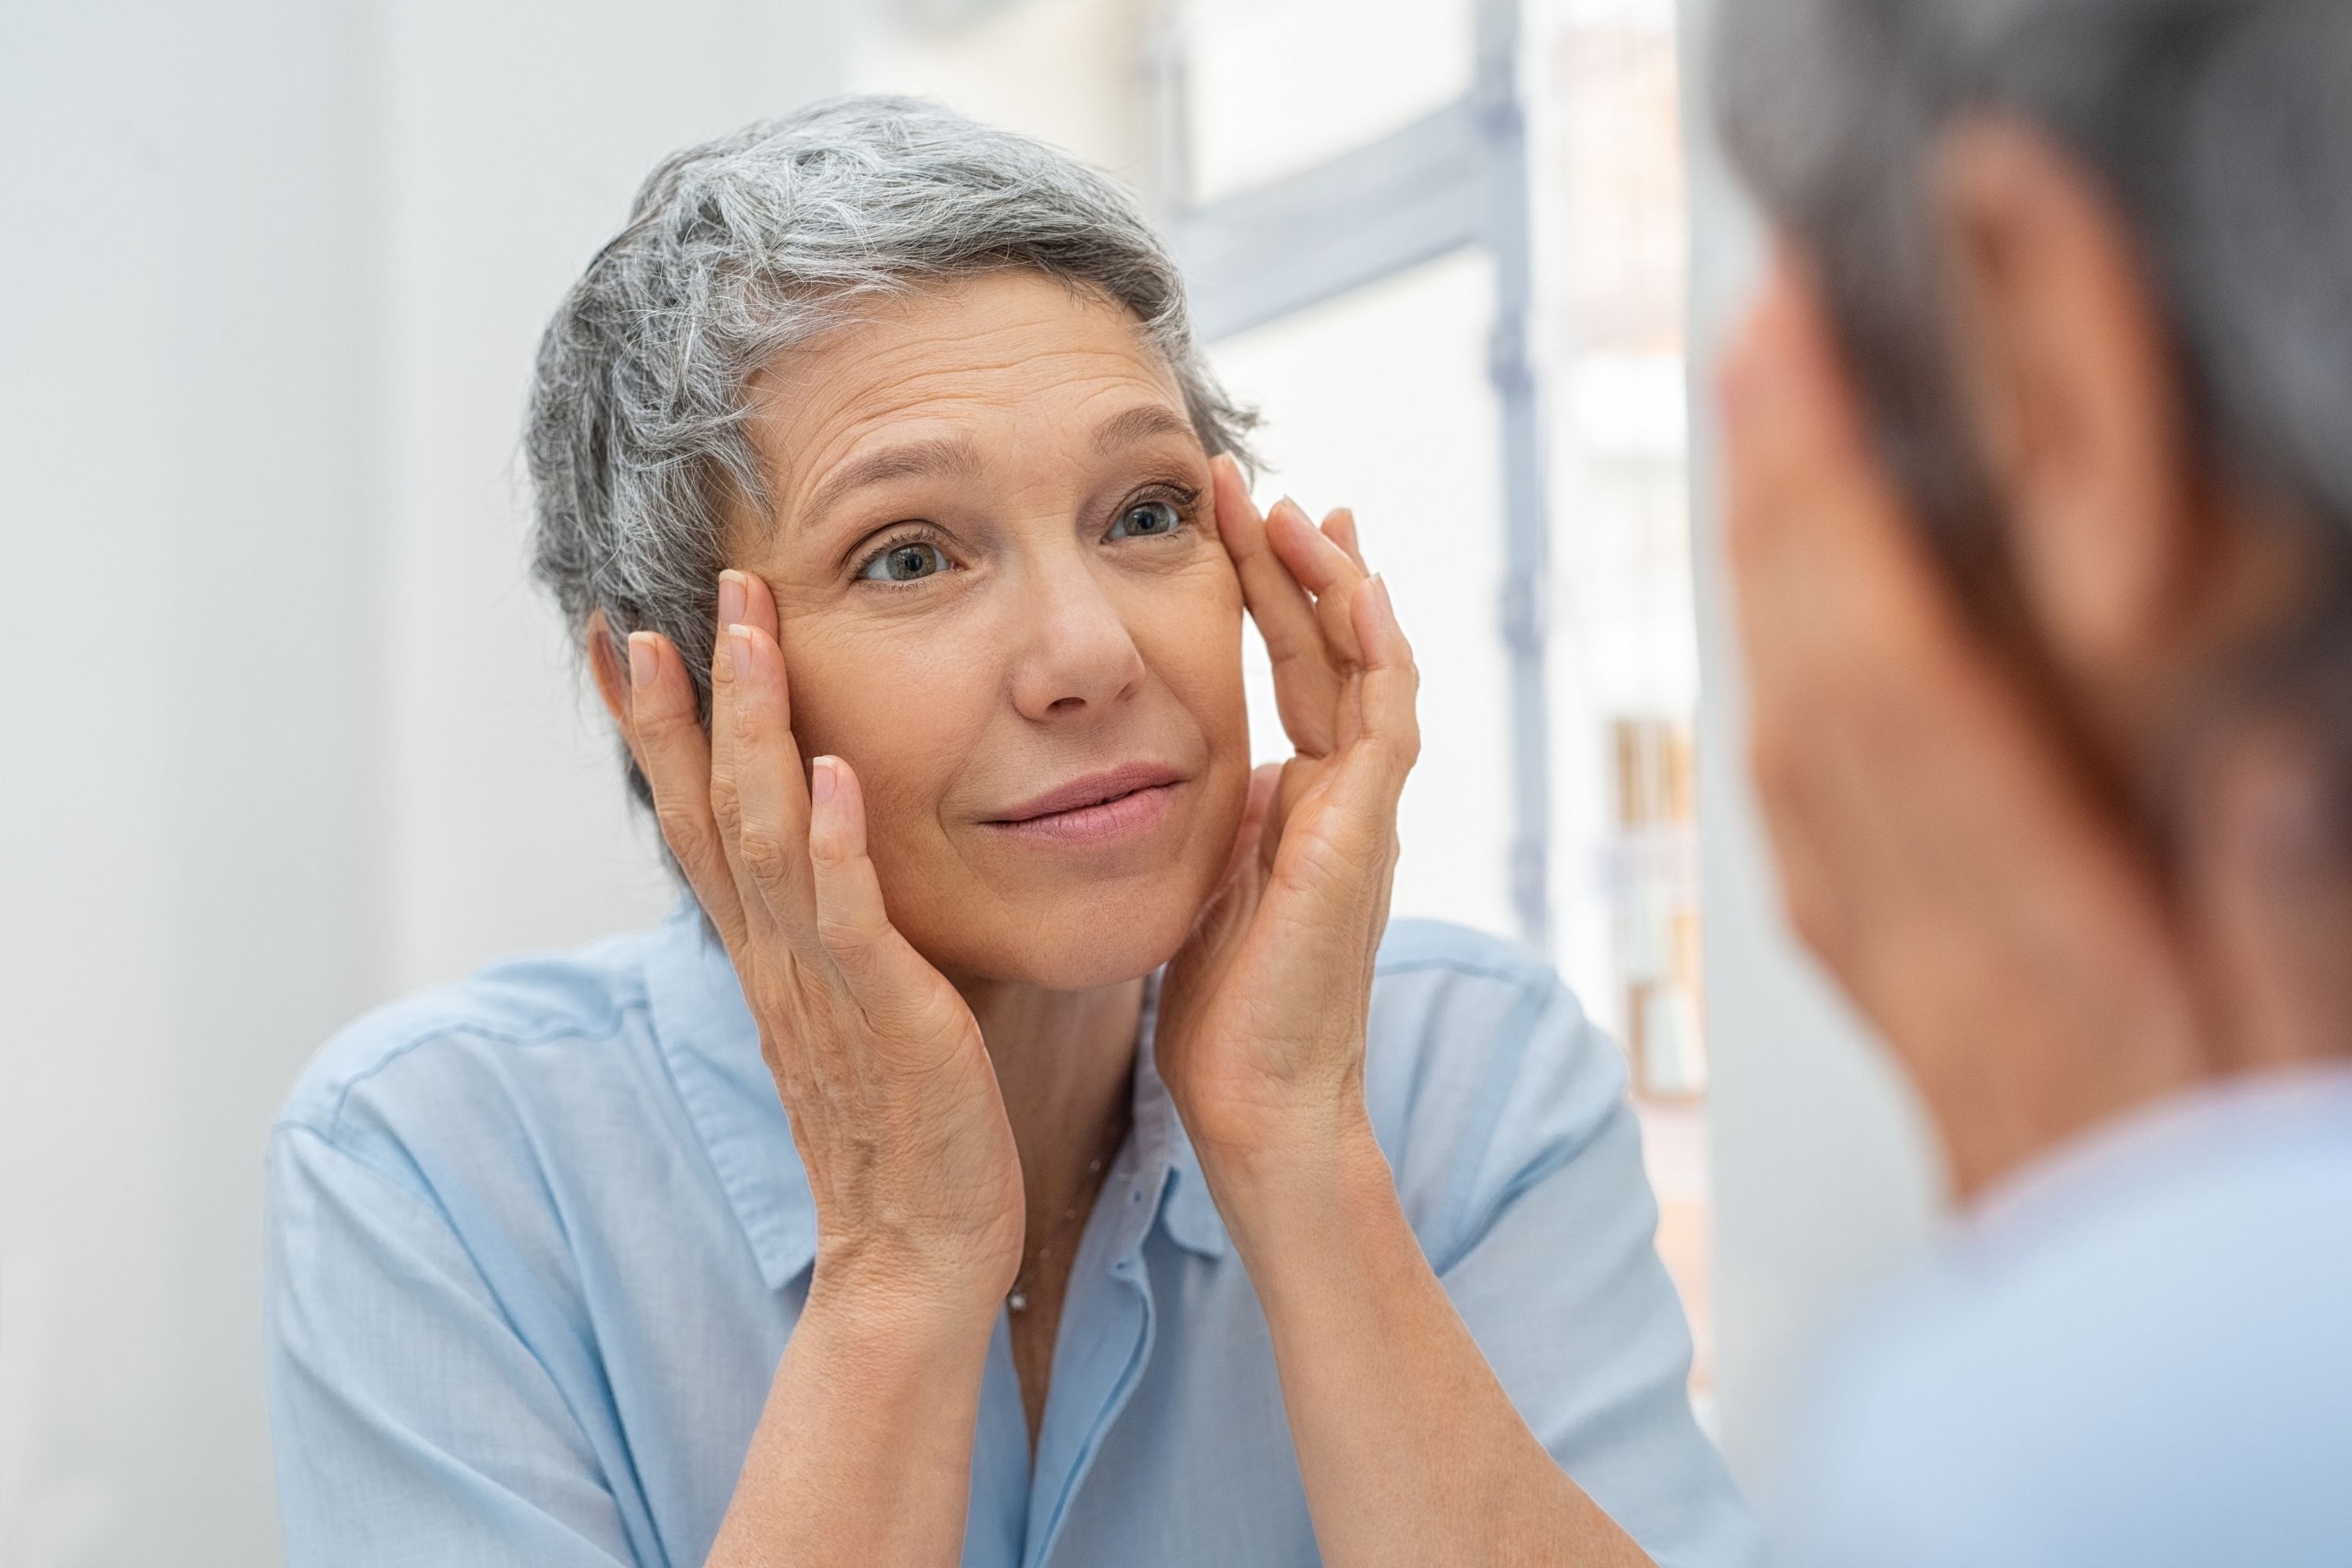 6 Ways To Fight Wrinkles And Slow Down Aging